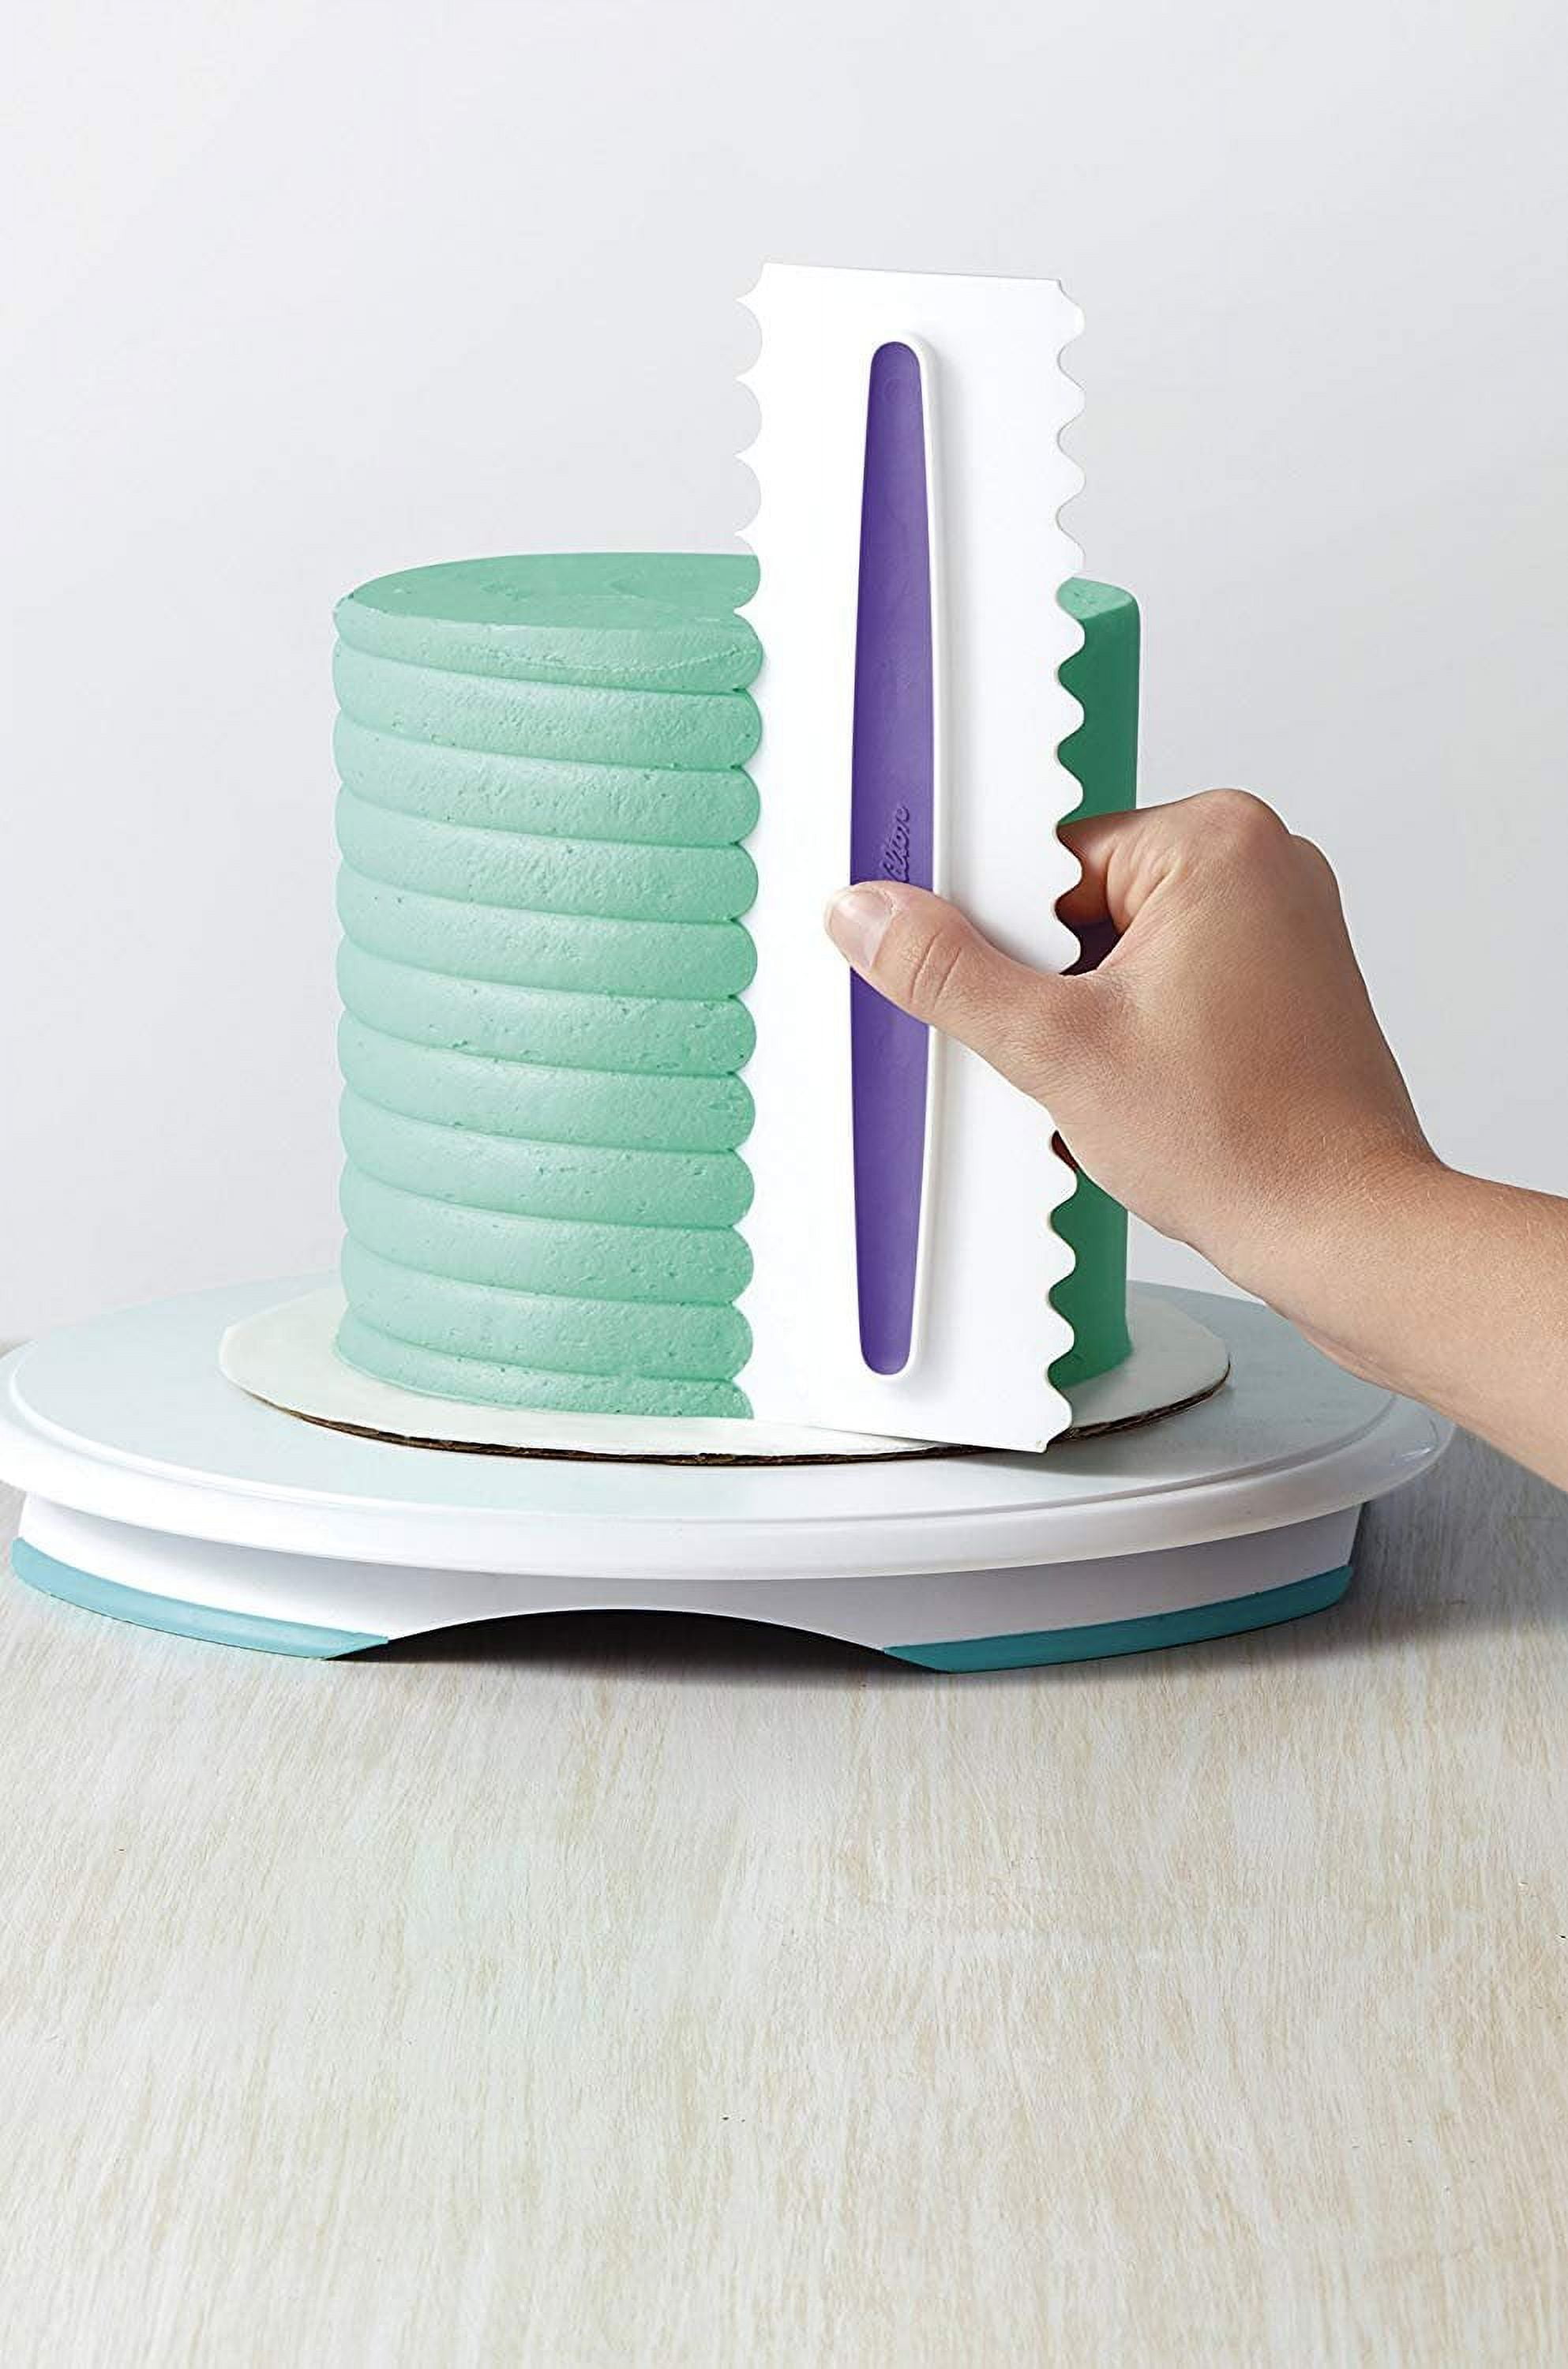 EIMELI Cake Scraper, Stainless Steel Cake Smoother Cake Icing Smoother Comb  9 inch Patterned Edge Decorating Comb - Walmart.com